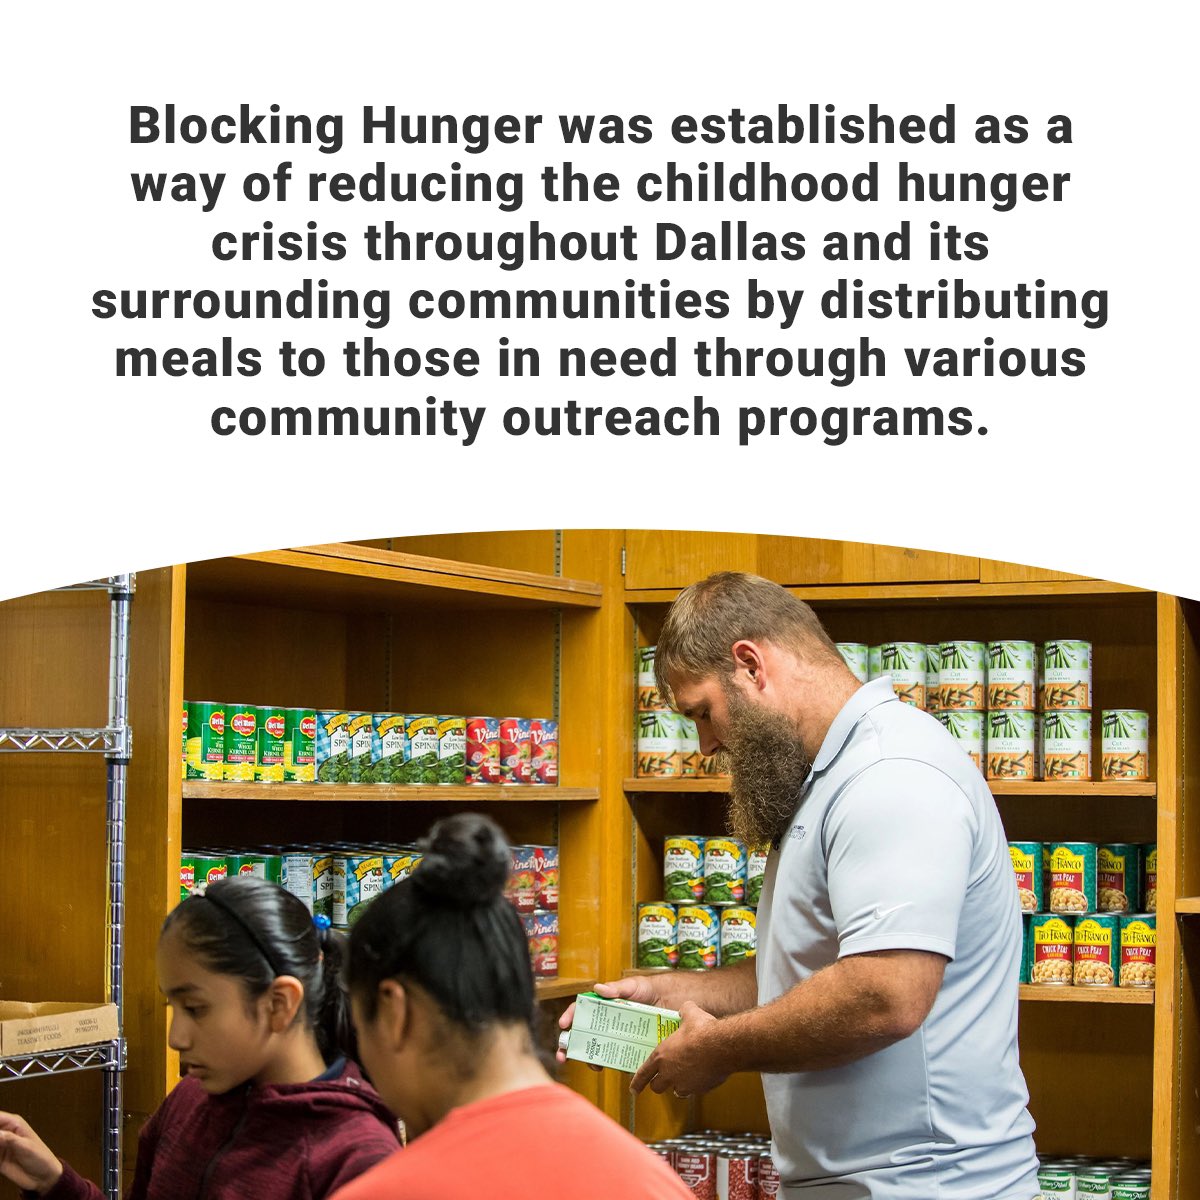 Join the @BlockingHunger team! With your donation, we can fight food insecurity in the DFW area & #BlockHunger together! Every donation gets us closer to our #GivingTuesday goal of raising $5,000 in 24 hours & provide more meals to children in need! ⬇️ bit.ly/3gHy1qh